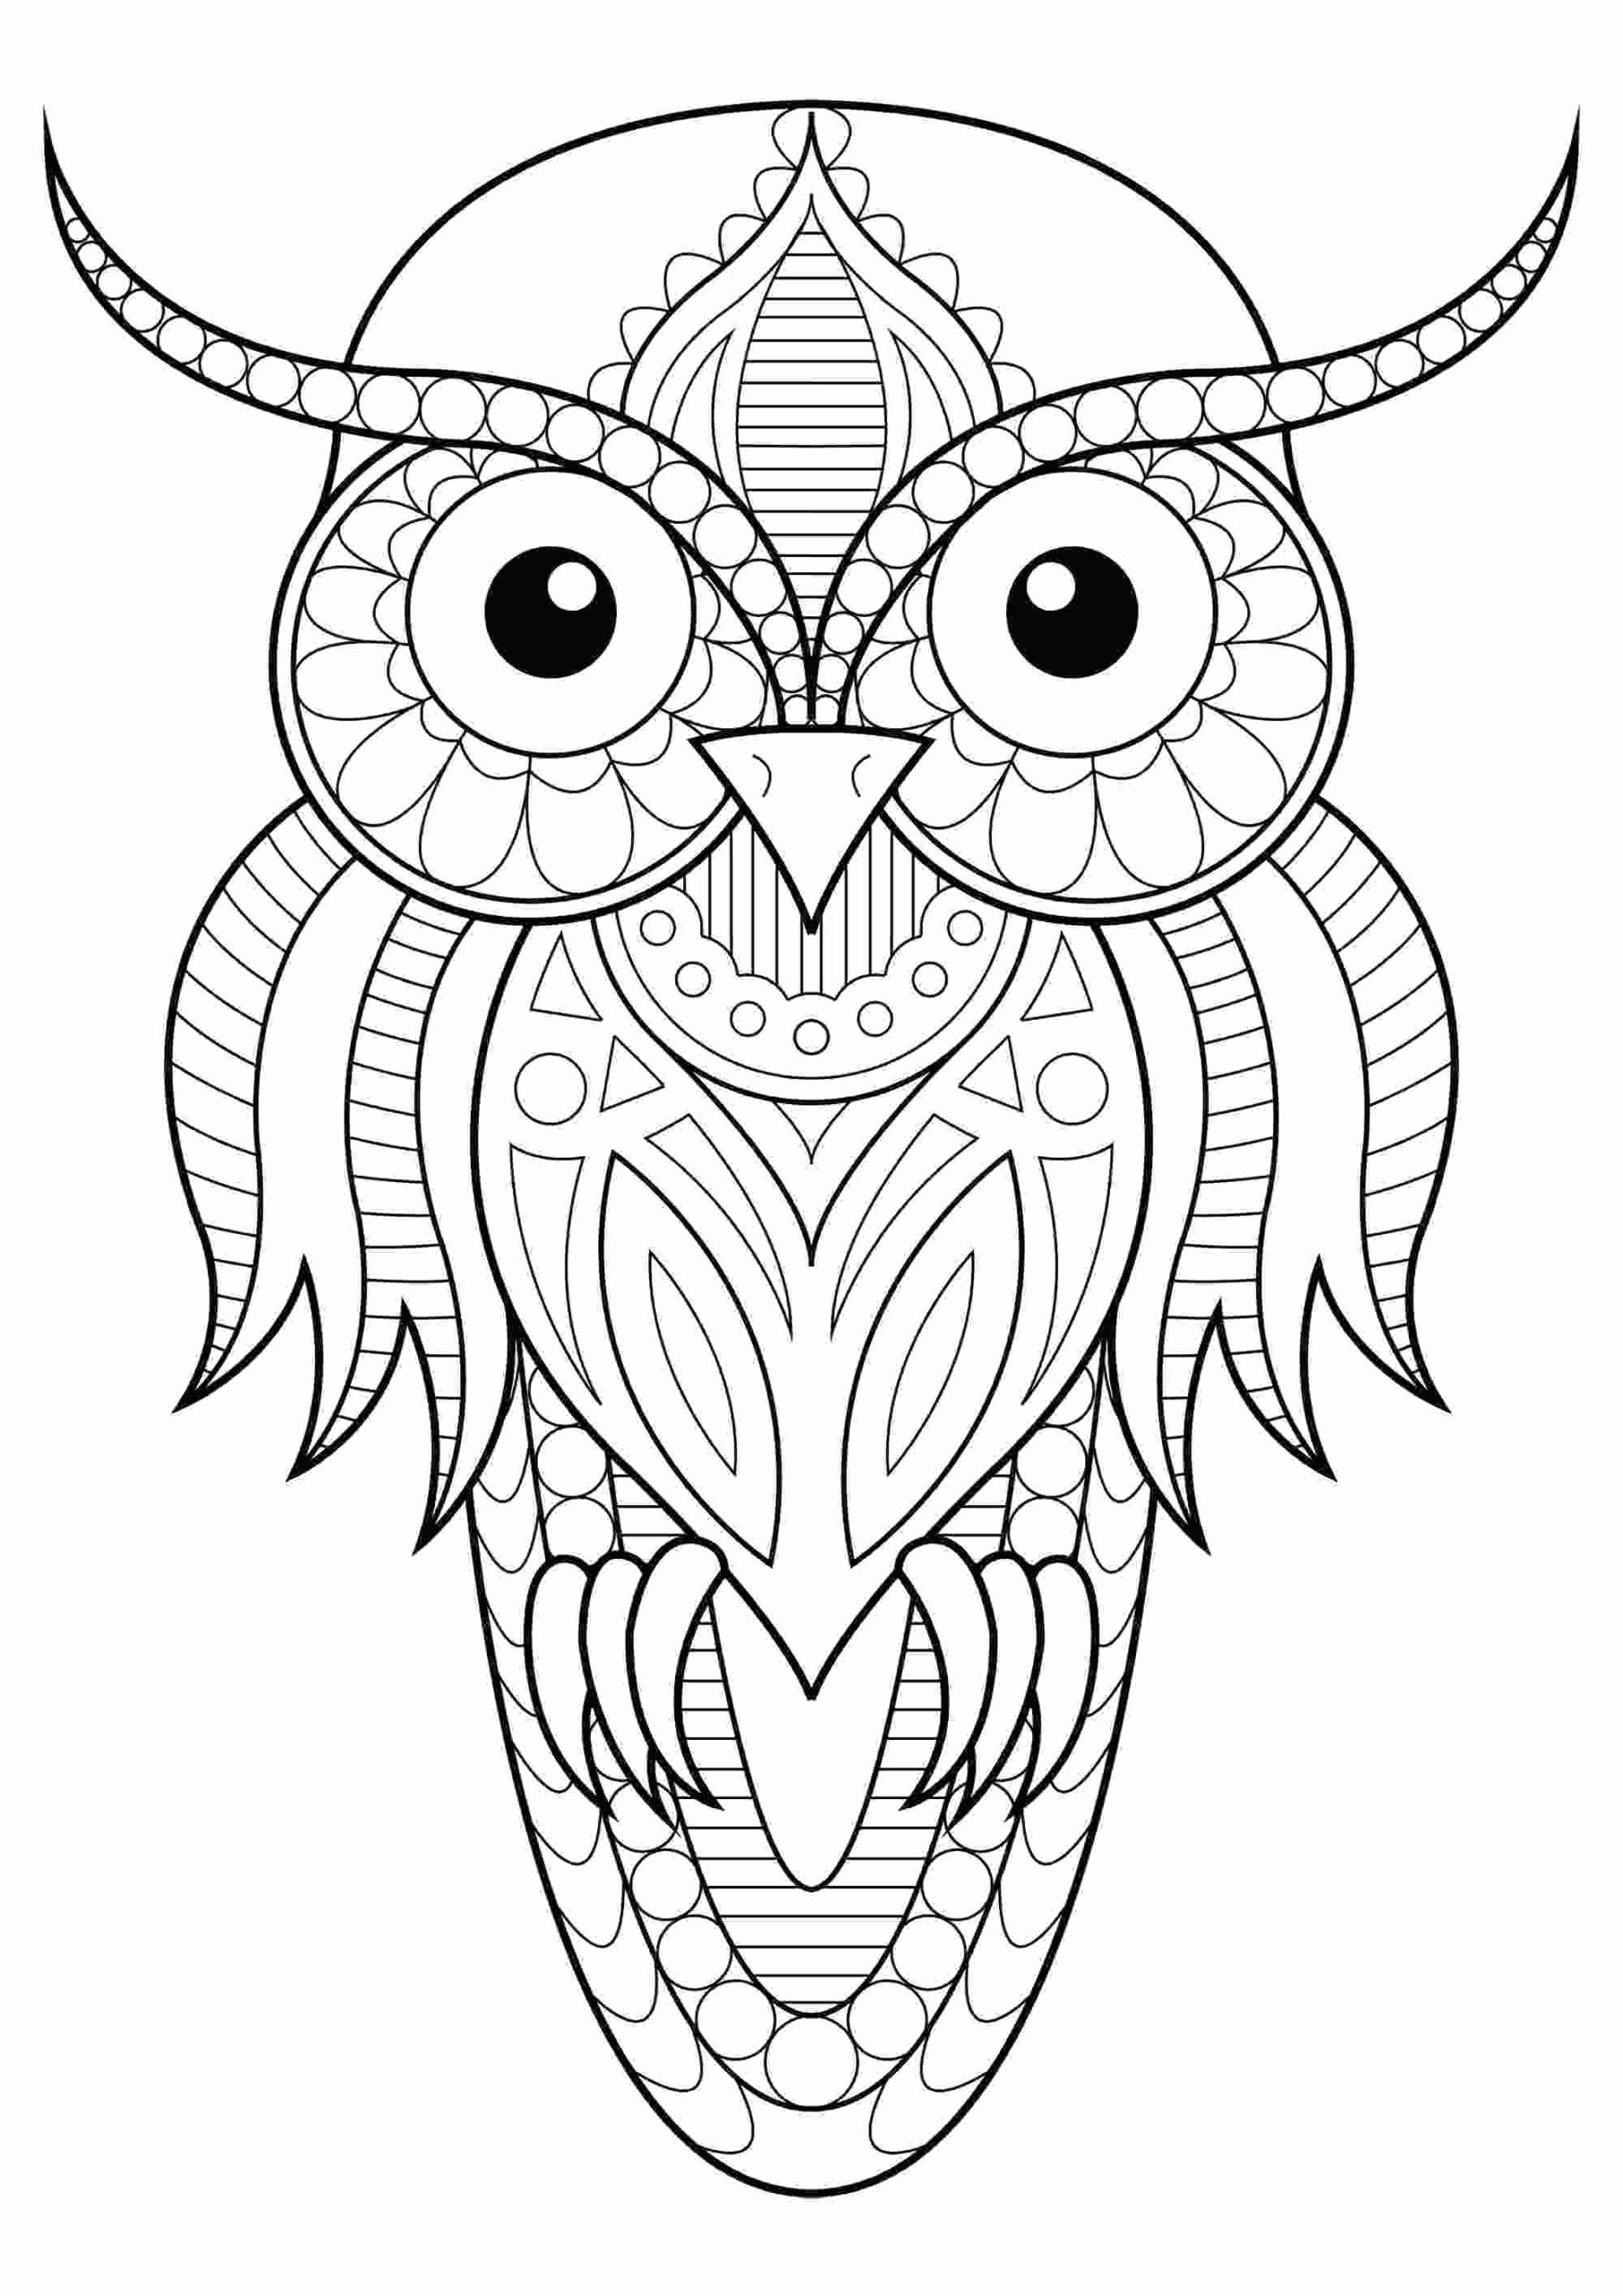 coloring-pages-free-patterns-coloring-pages